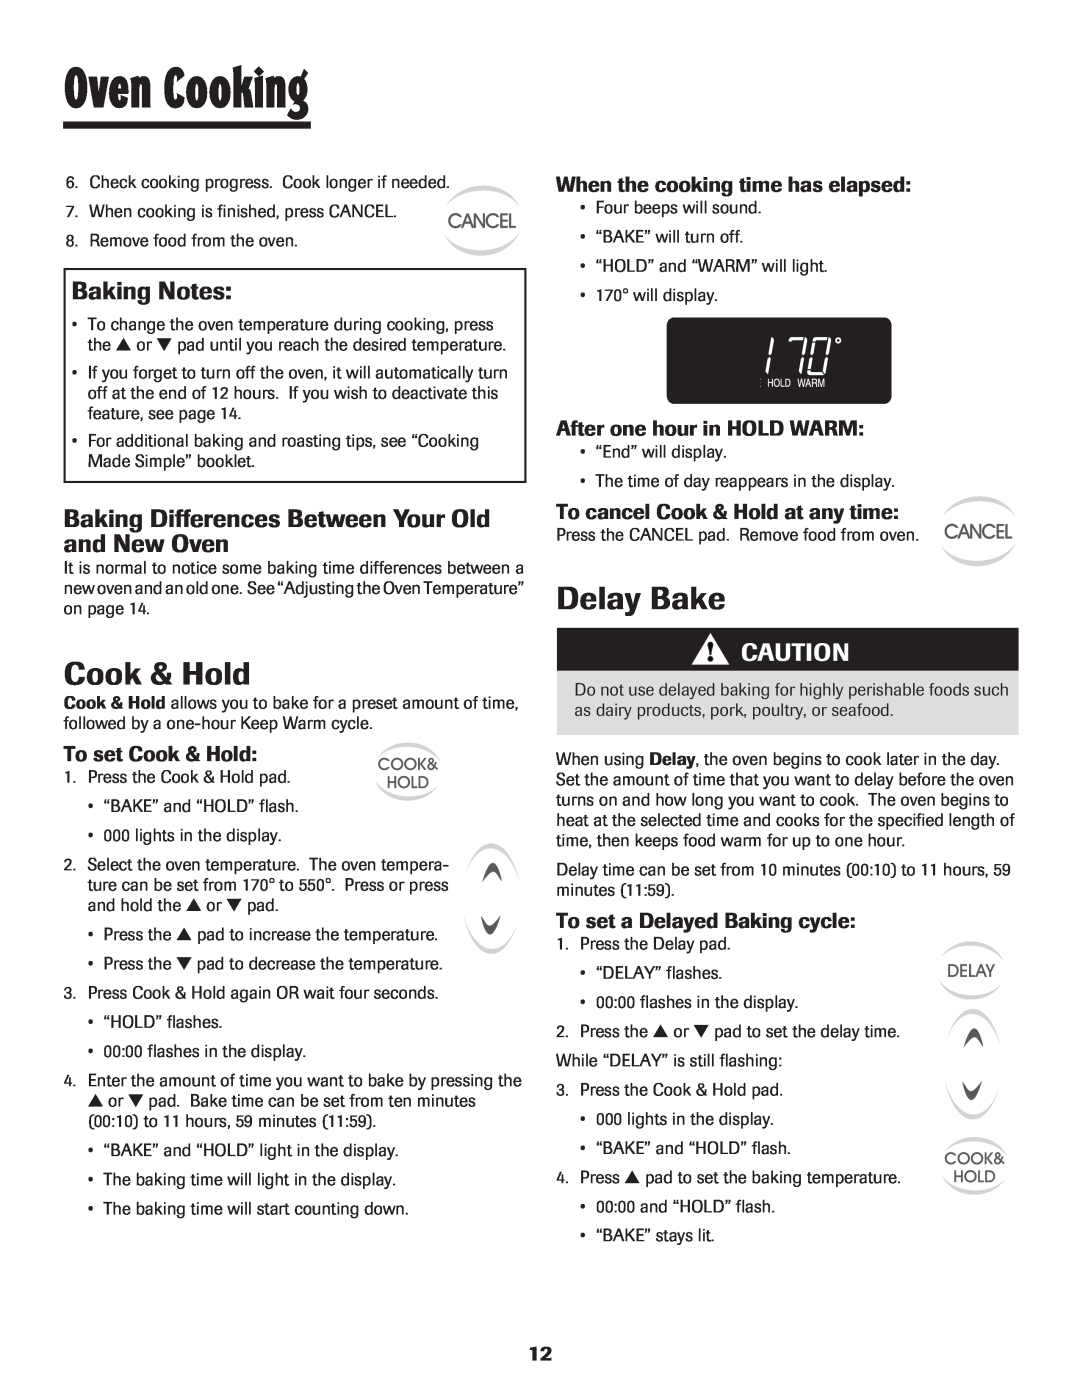 Maytag Delay Bake, Baking Notes, Baking Differences Between Your Old and New Oven, To set Cook & Hold, Oven Cooking 